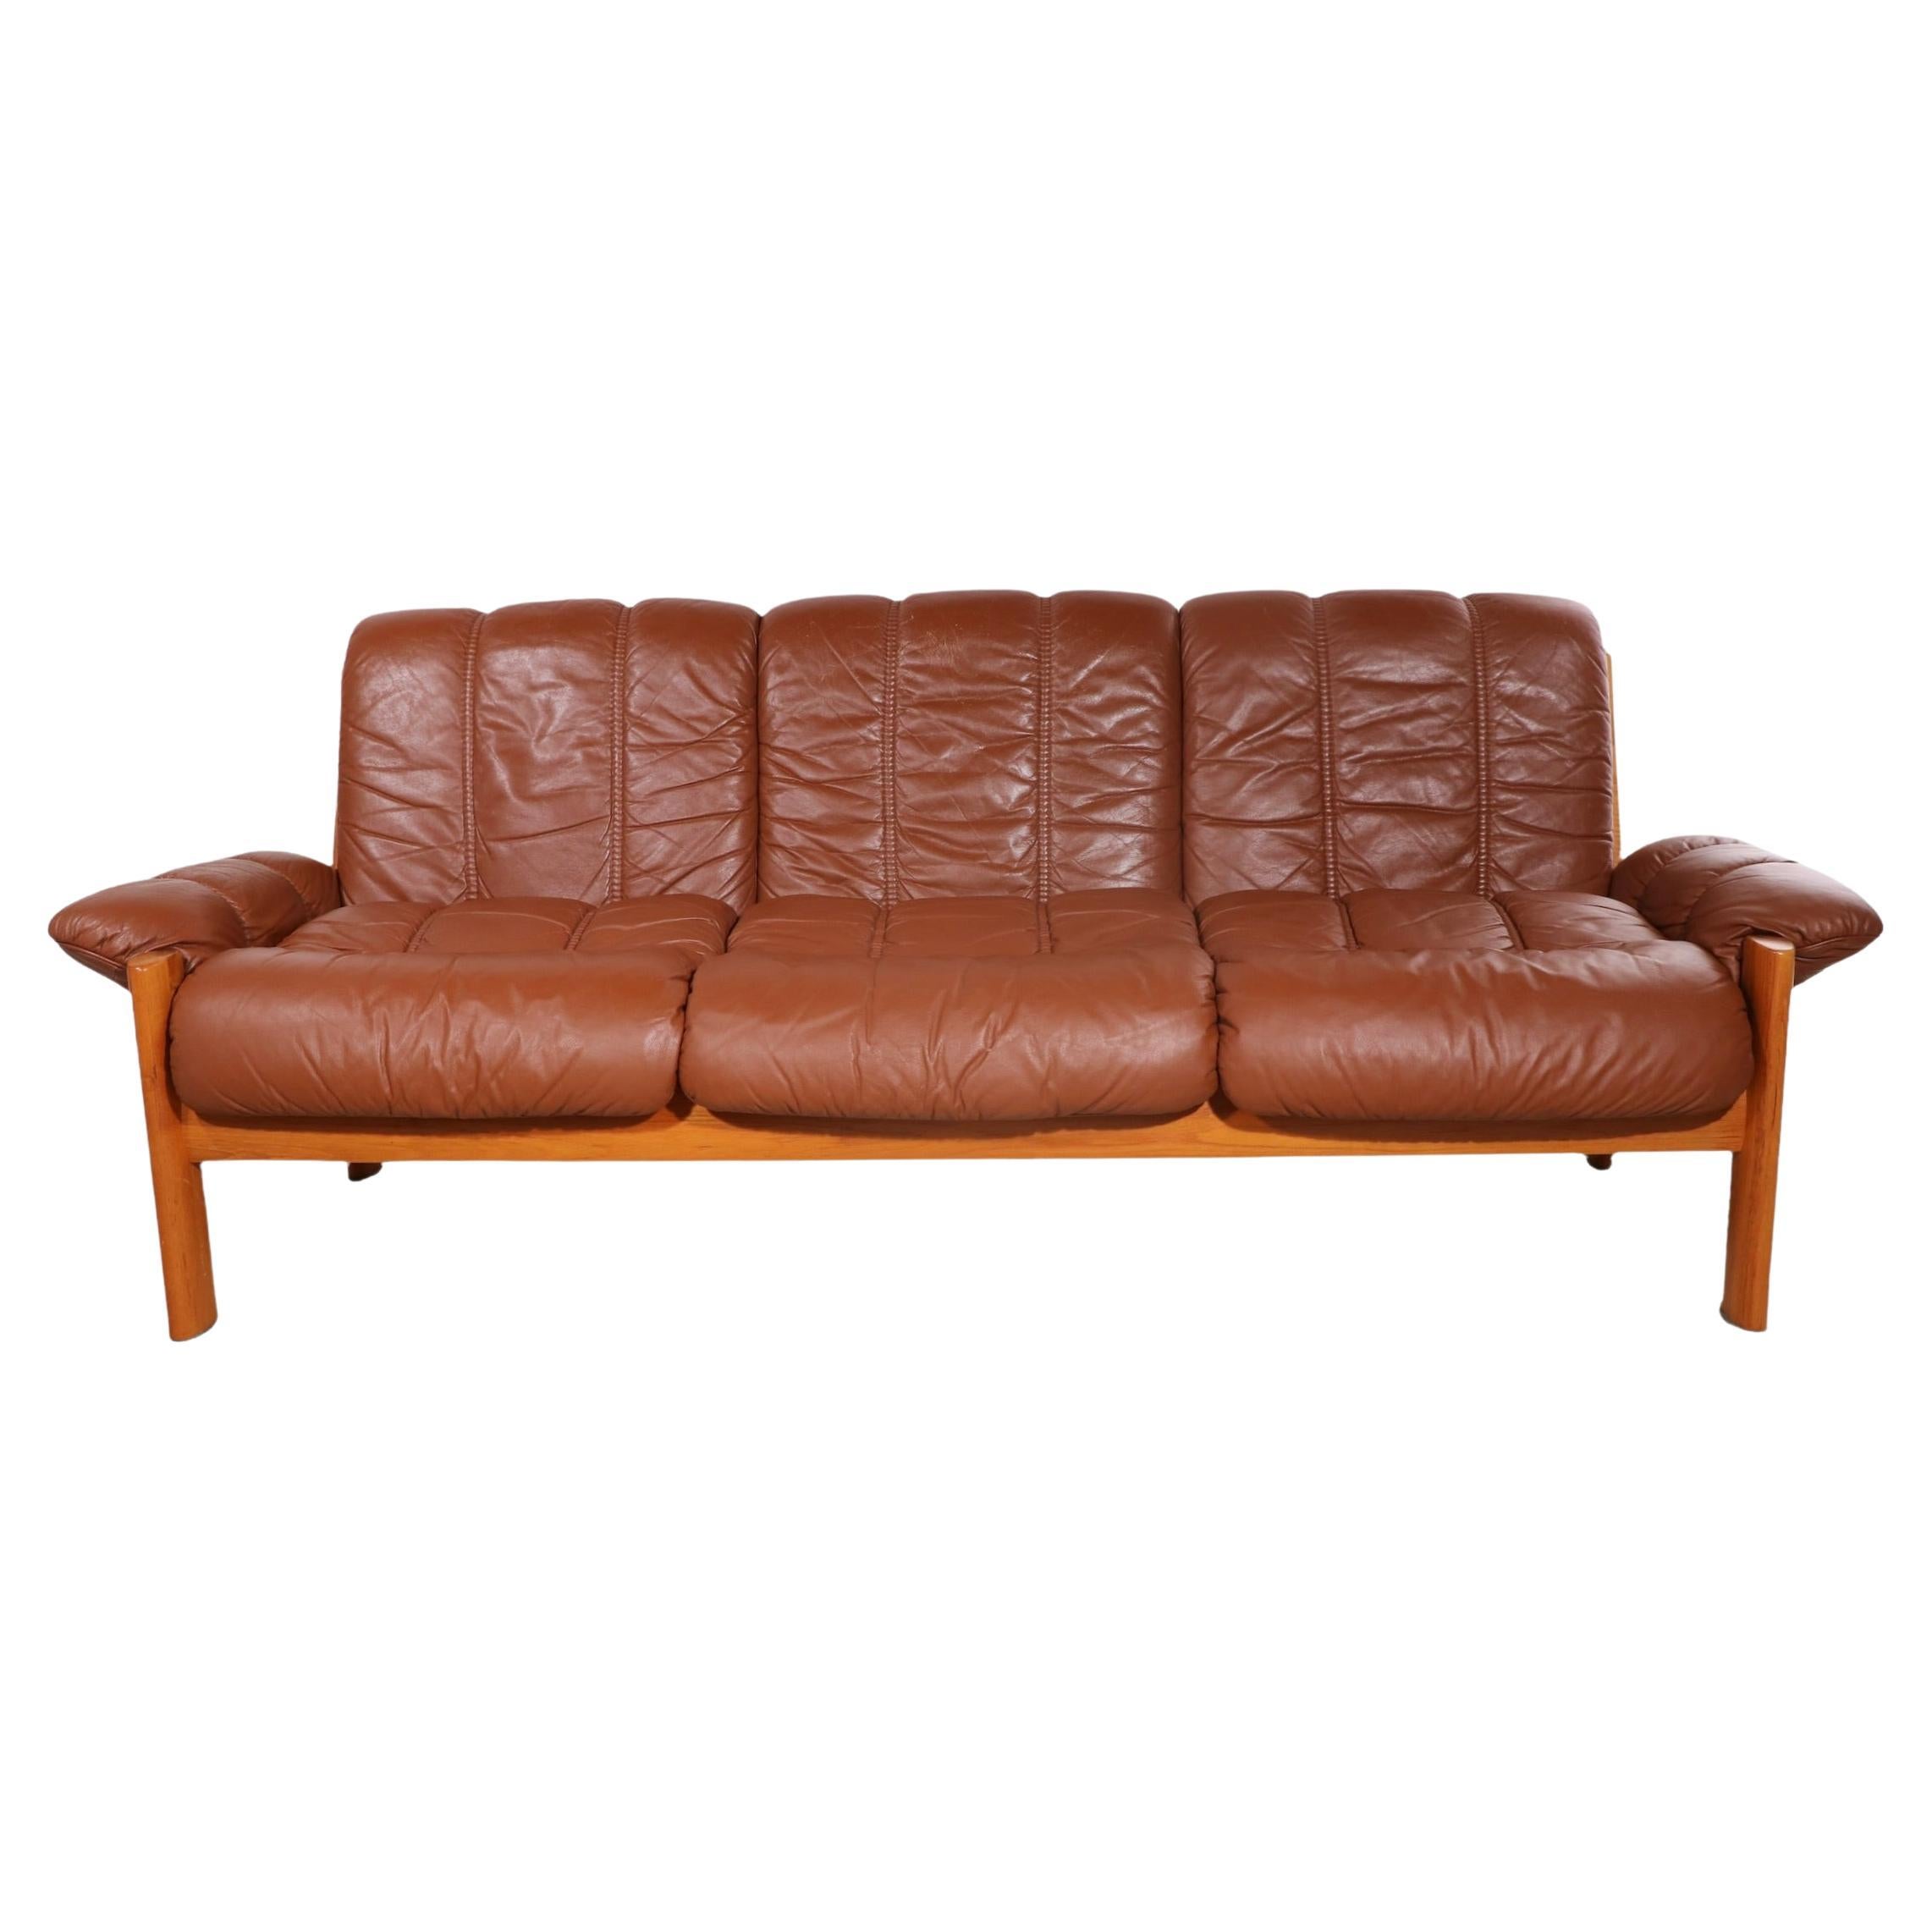 Leather and Teak Sofa by Ekornes Stressless Made in Norway Ca. 1970's